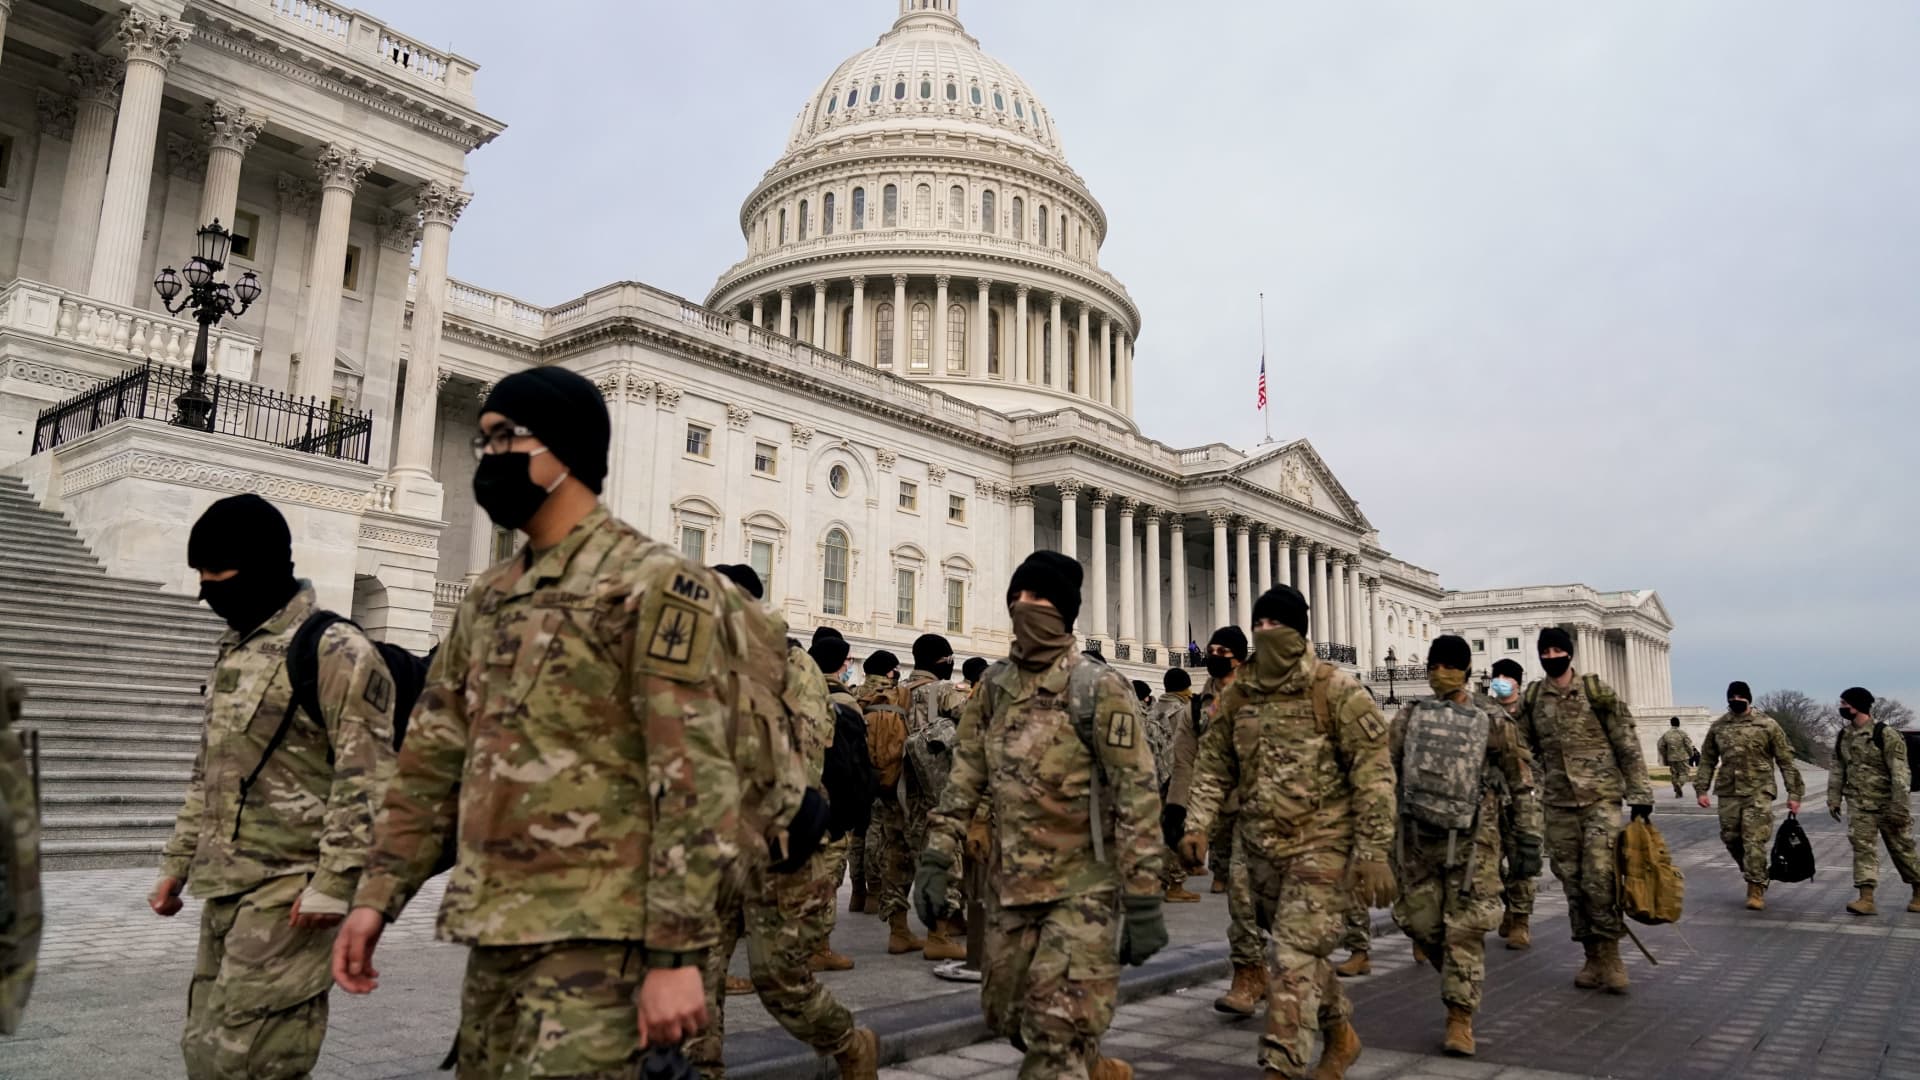 Members of the National Guard arrive to the U.S. Capitol days after supporters of U.S. President Donald Trump stormed the Capitol in Washington, U.S. January 11, 2021.